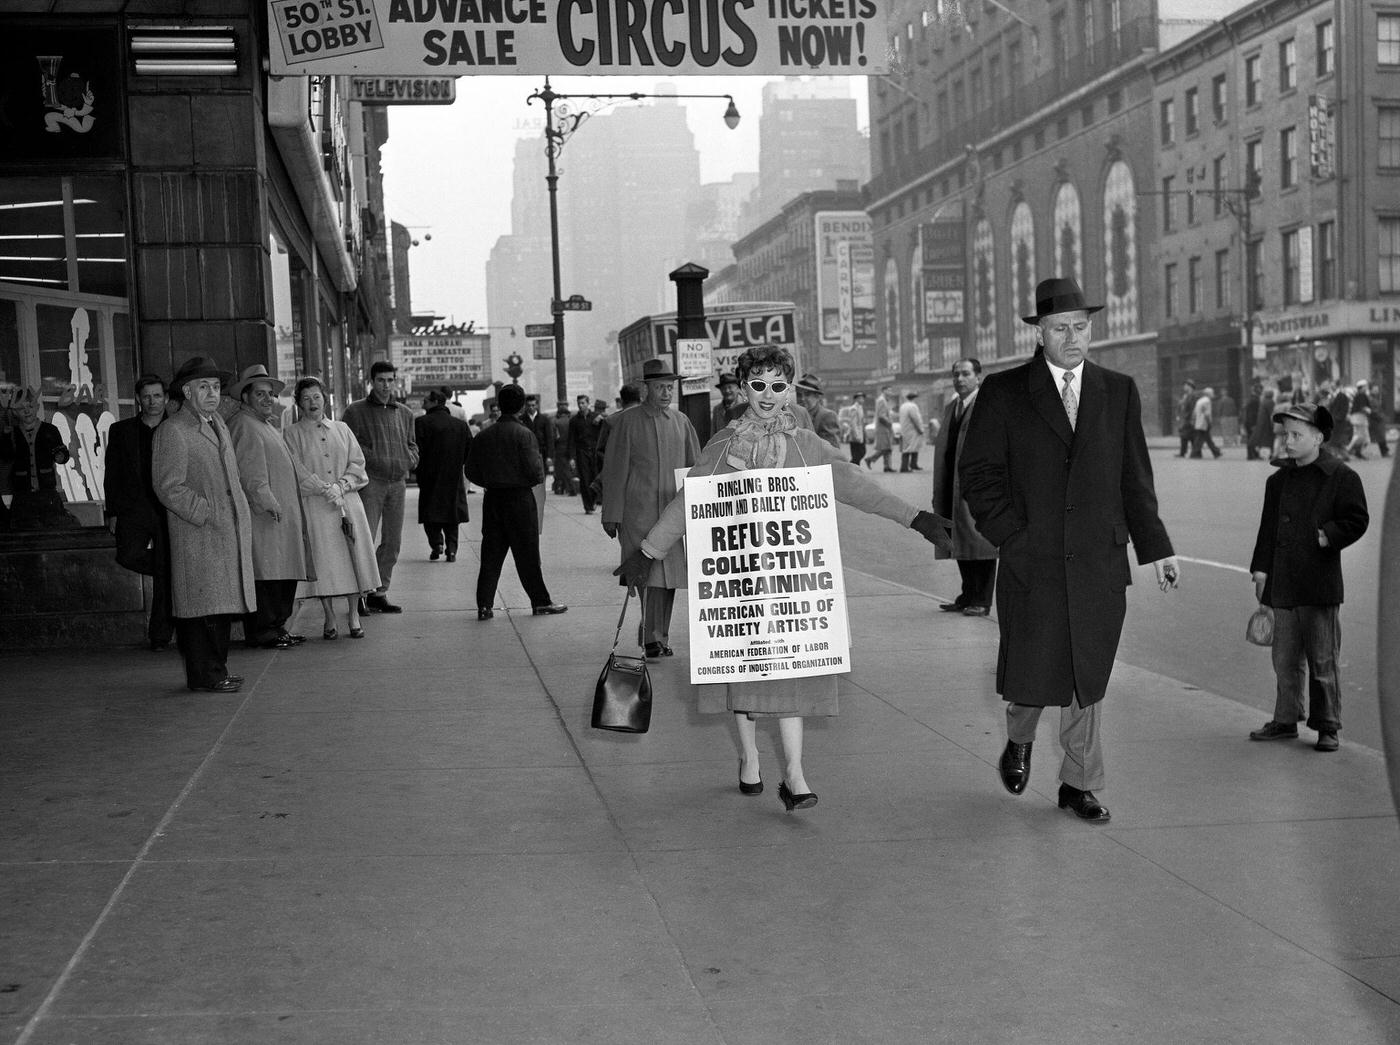 Circus Threatened With Strike: Pickets Parade In Front Of Madison Square Garden Announcing The Sale Of Tickets To The Ringling Brothers And Barnum And Bailey Circus, Manhattan.